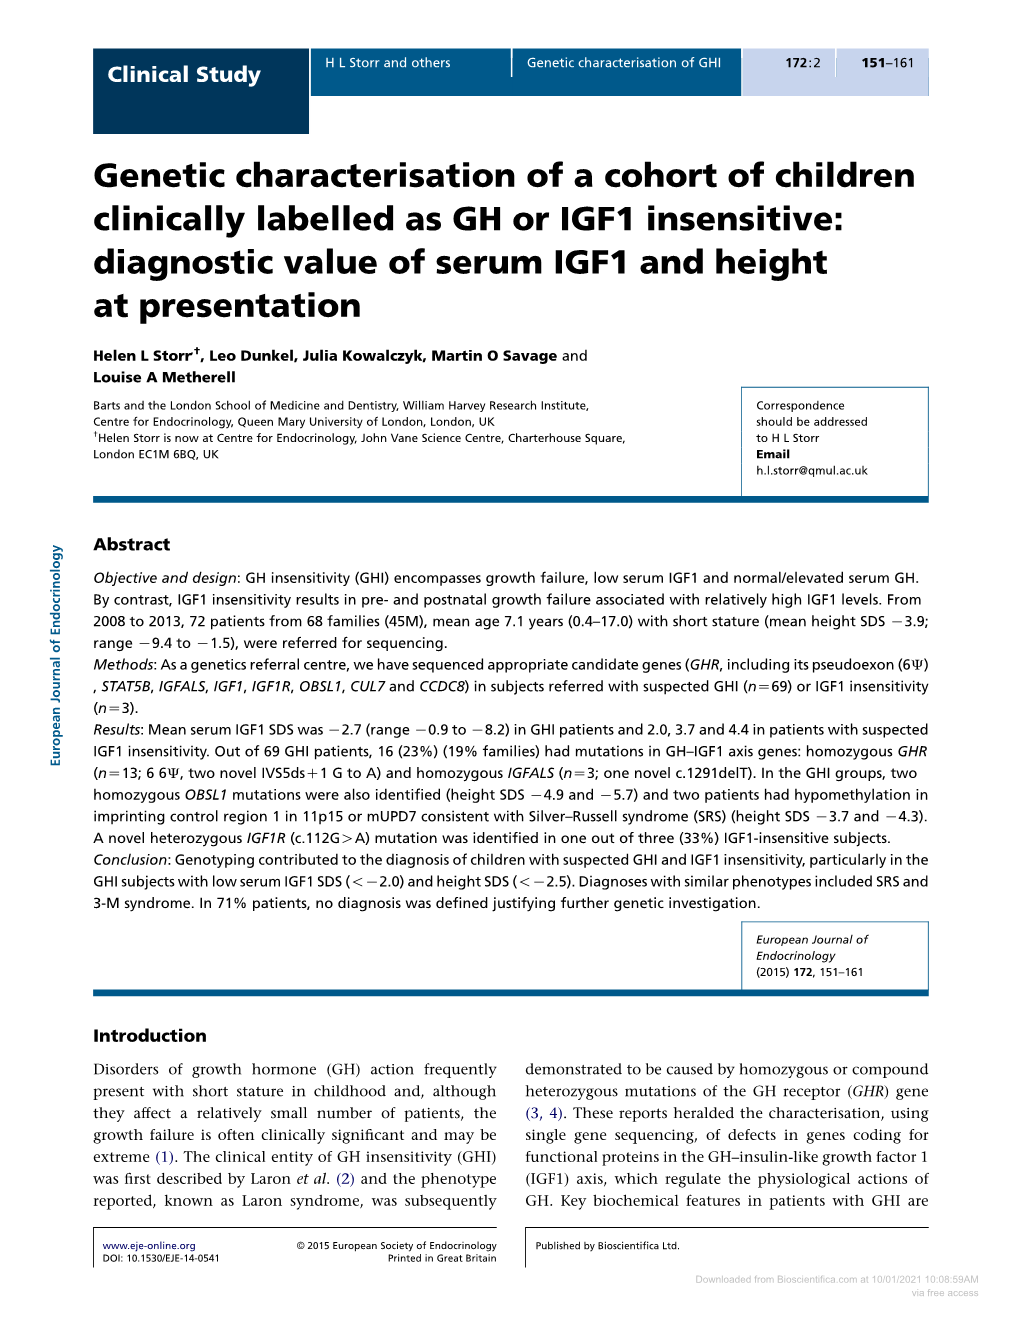 Genetic Characterisation of a Cohort of Children Clinically Labelled As GH Or IGF1 Insensitive: Diagnostic Value of Serum IGF1 and Height at Presentation